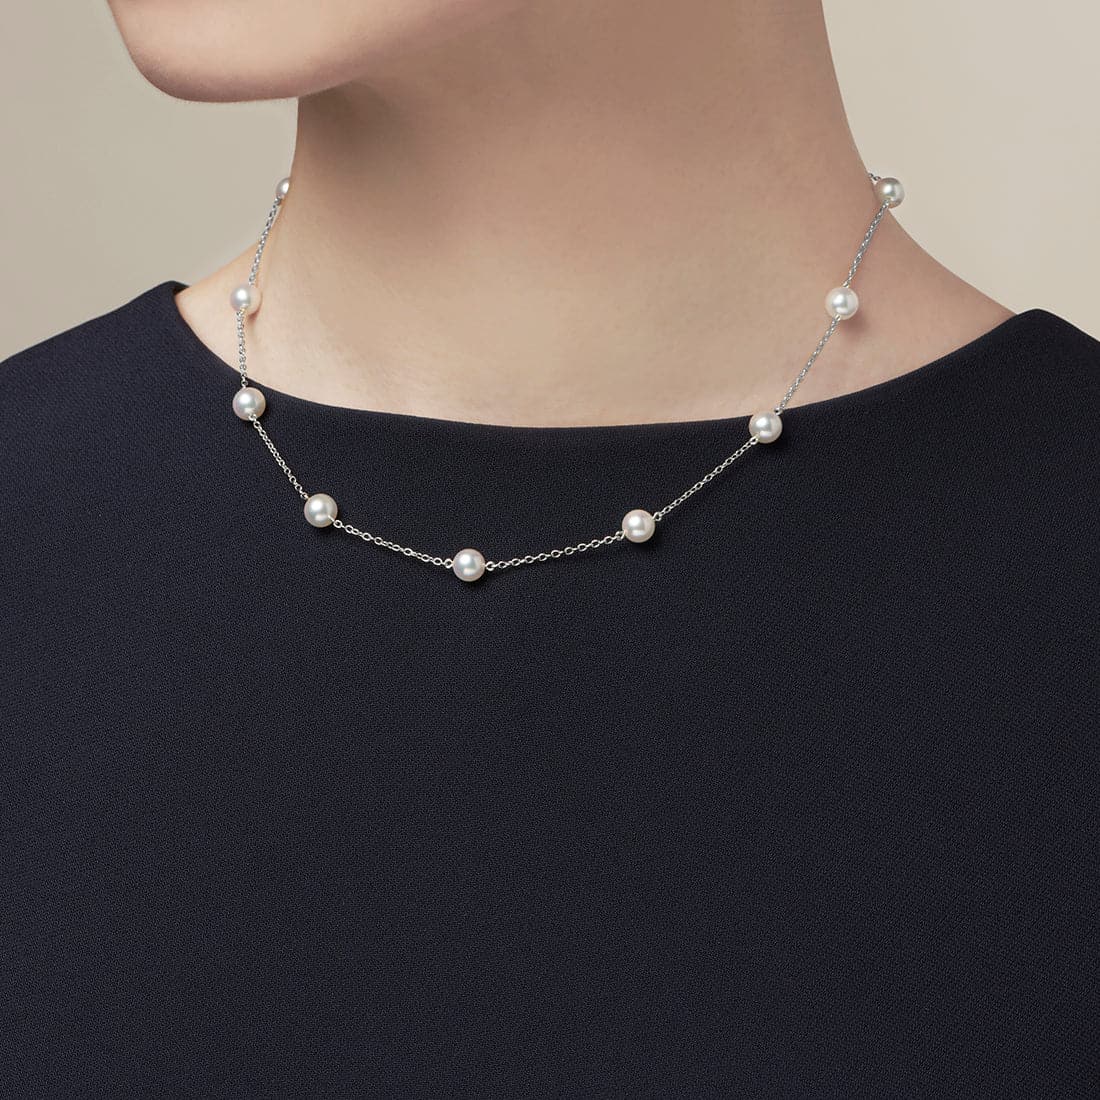 Mikimoto Gold Akoya Pearl Station Necklace - Skeie's Jewelers